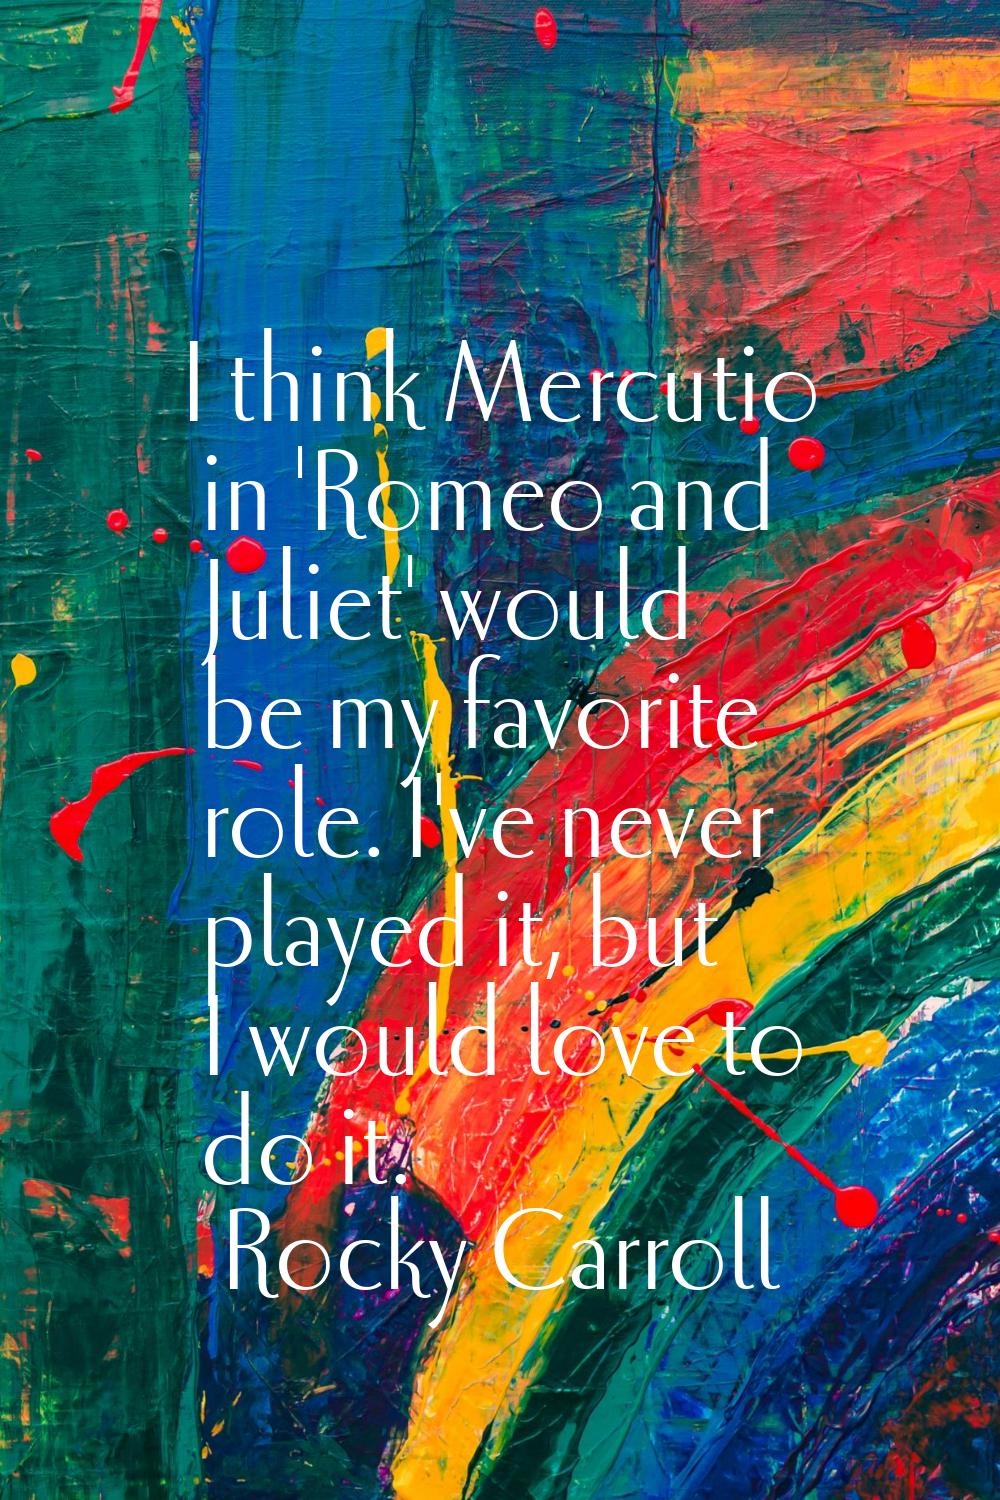 I think Mercutio in 'Romeo and Juliet' would be my favorite role. I've never played it, but I would